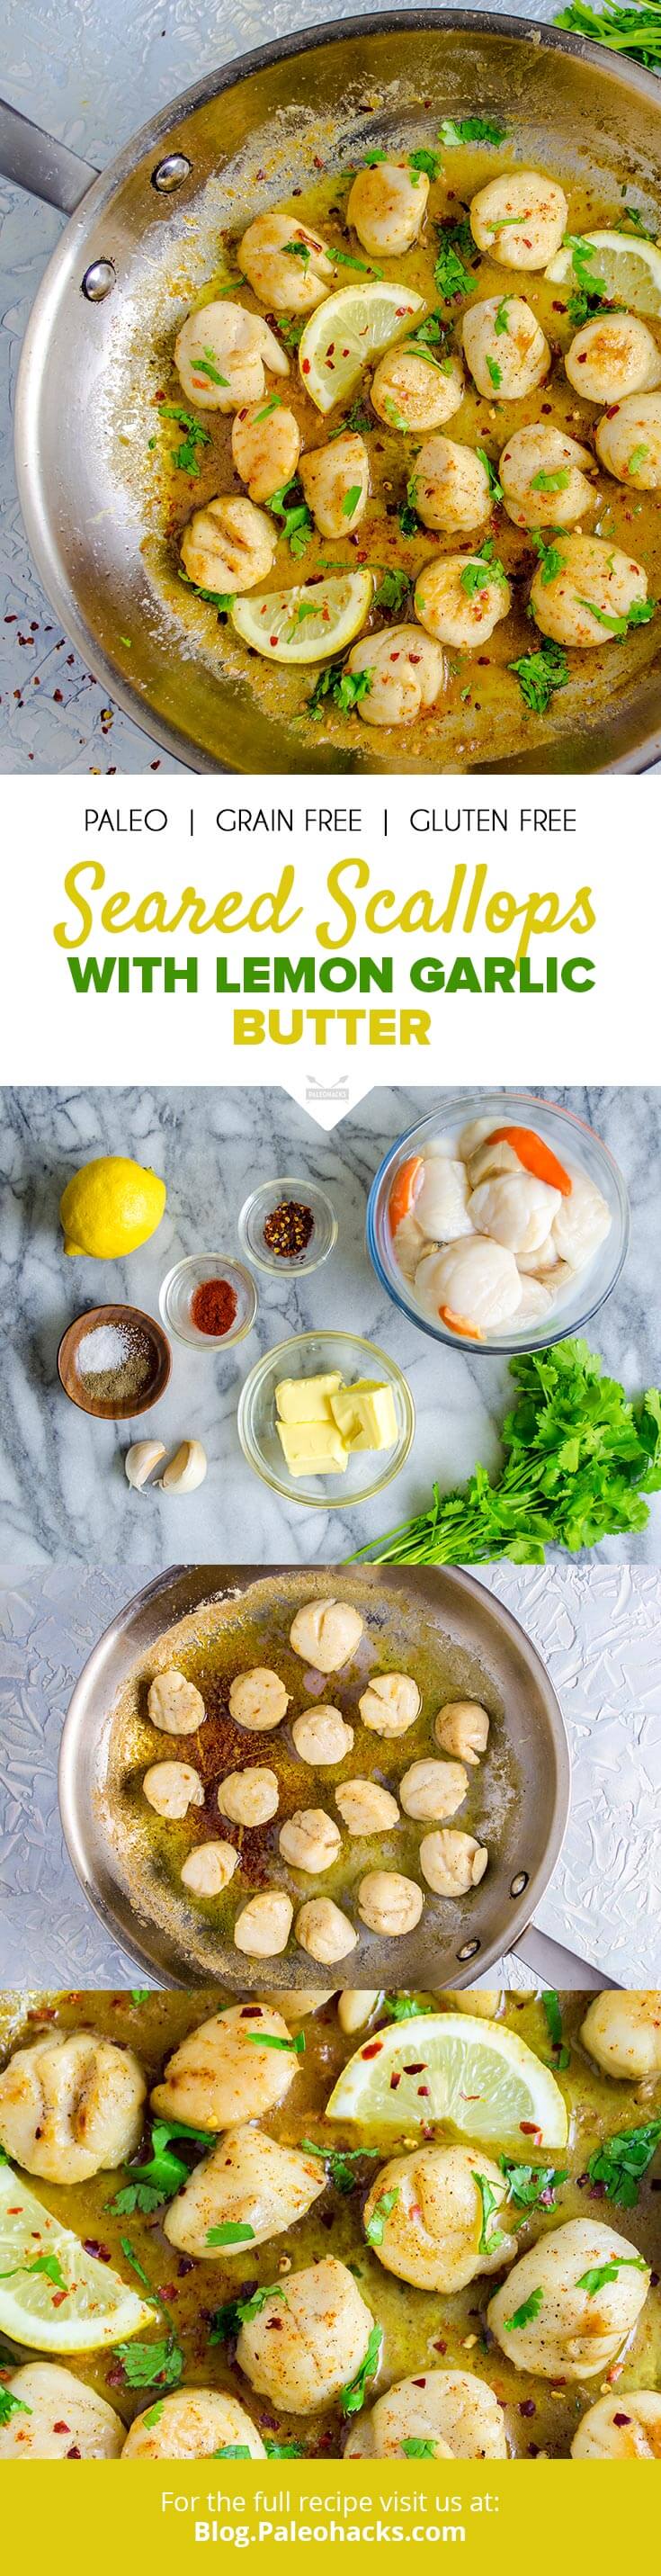 Seared scallops with herb-infused lemon butter sauce will melt in your mouth! All you need is ten minutes and a handful of ingredients.